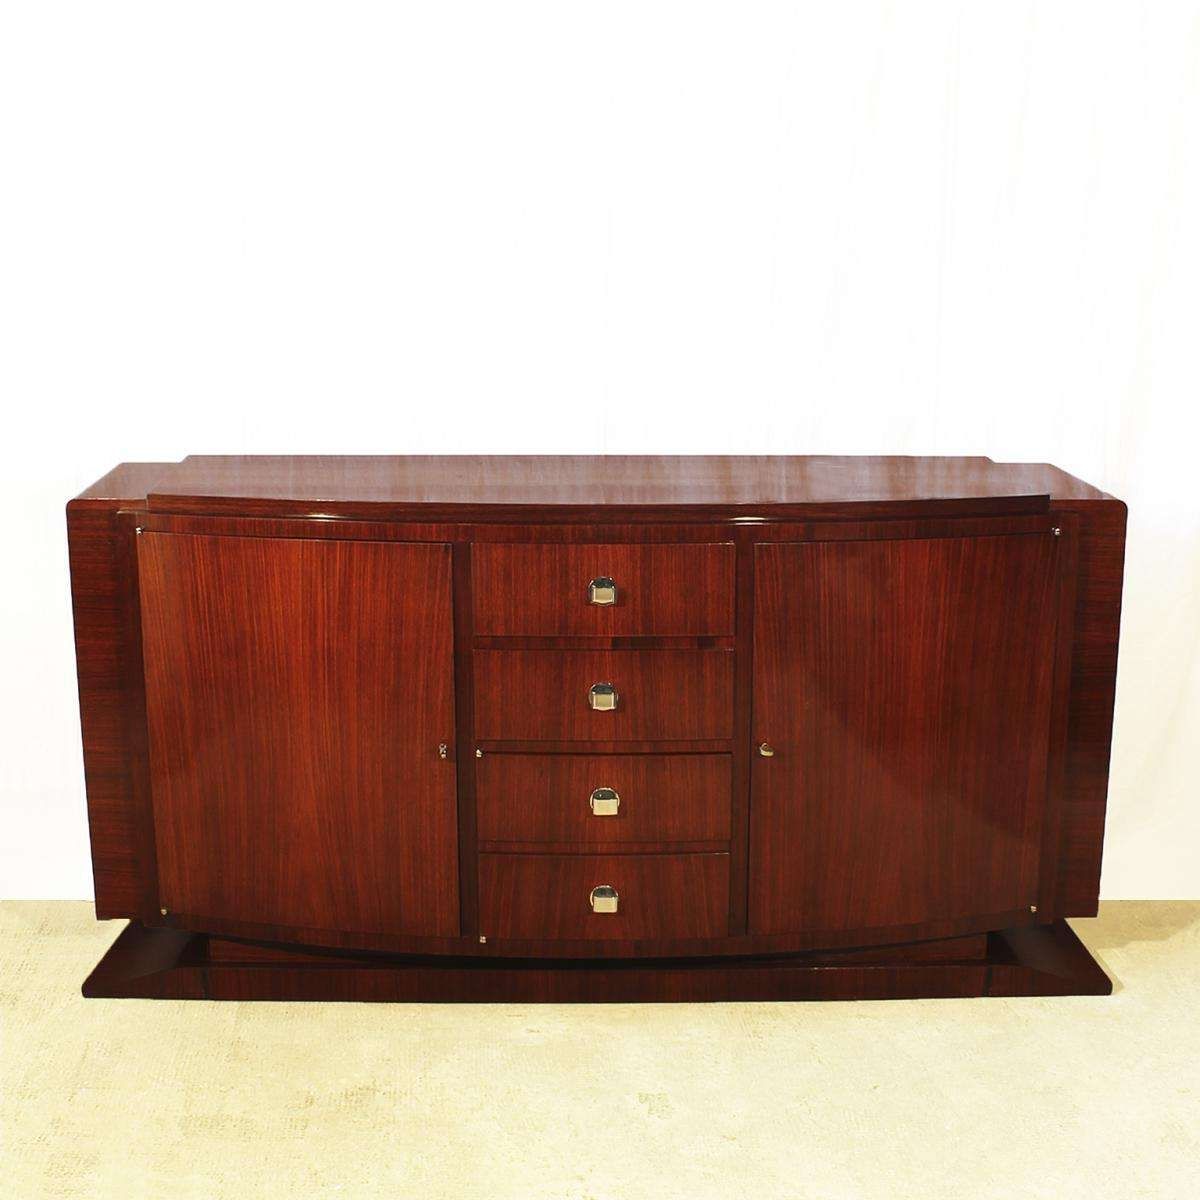 French Art Deco Mahogany & Rosewood Sideboard, 1930s For Sale At For Art Deco Sideboards (View 14 of 20)